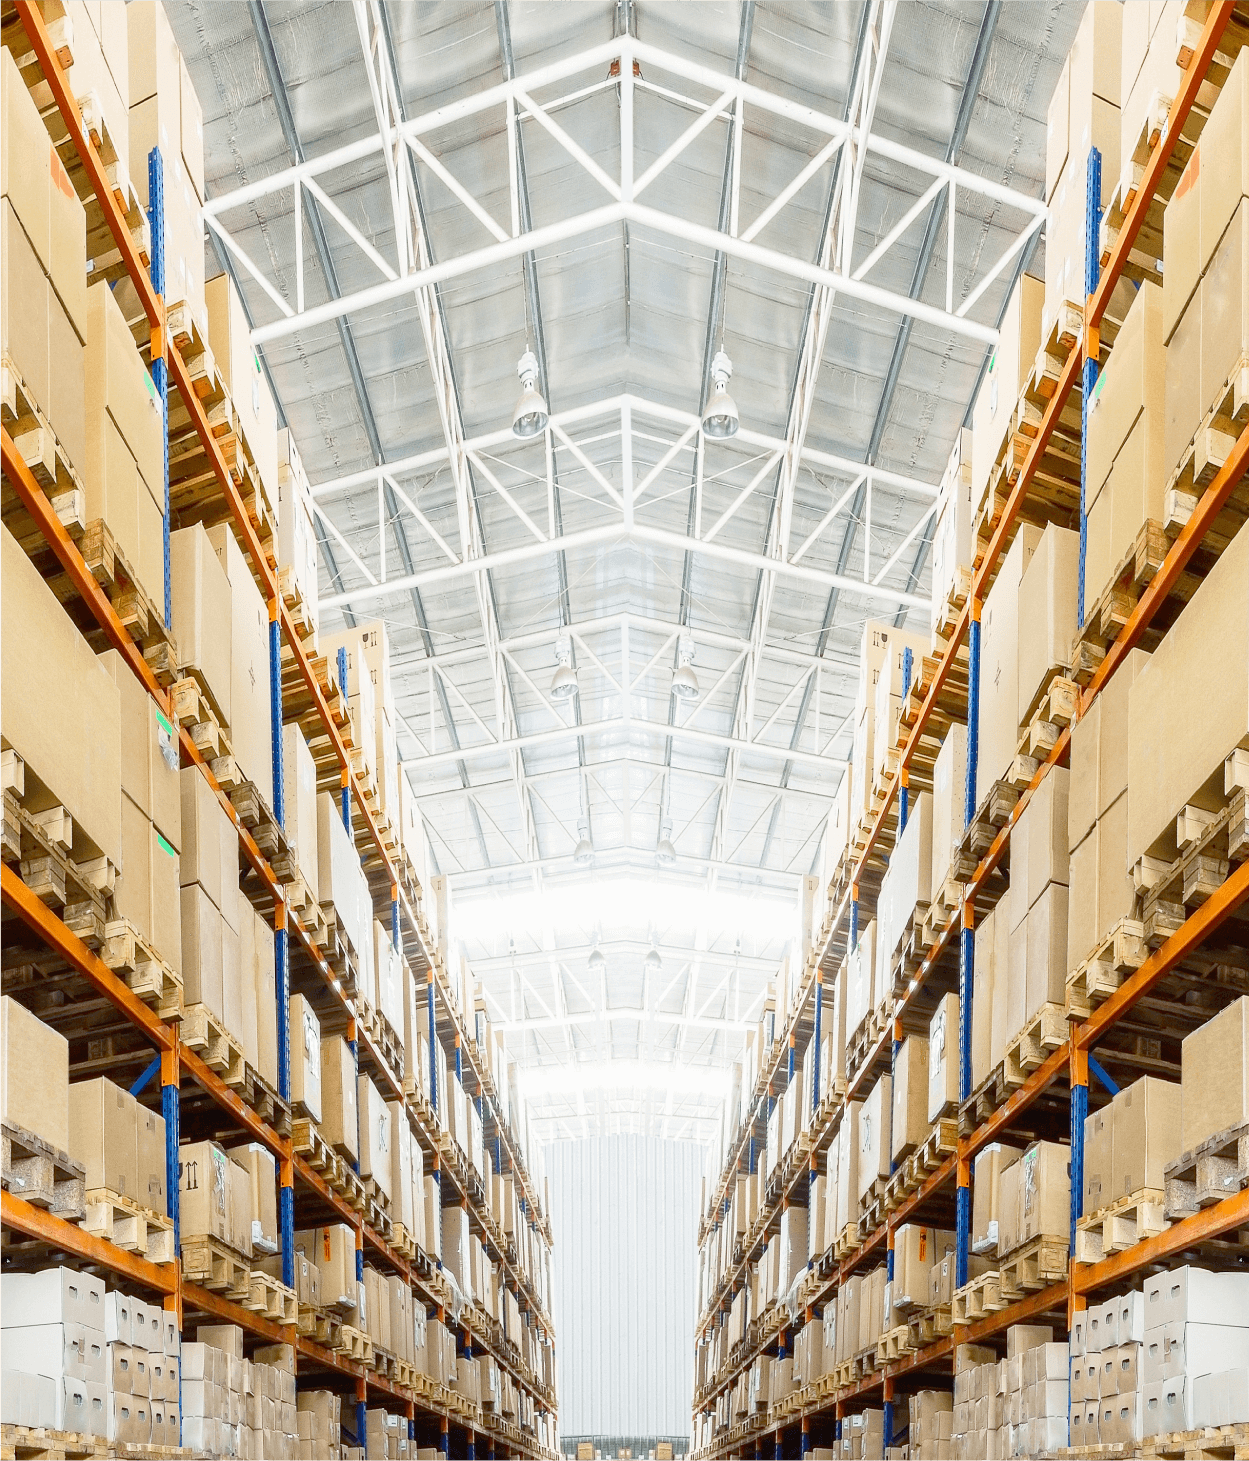 Photo looking down large industrial warehouse aisle with boxes on tall shelves